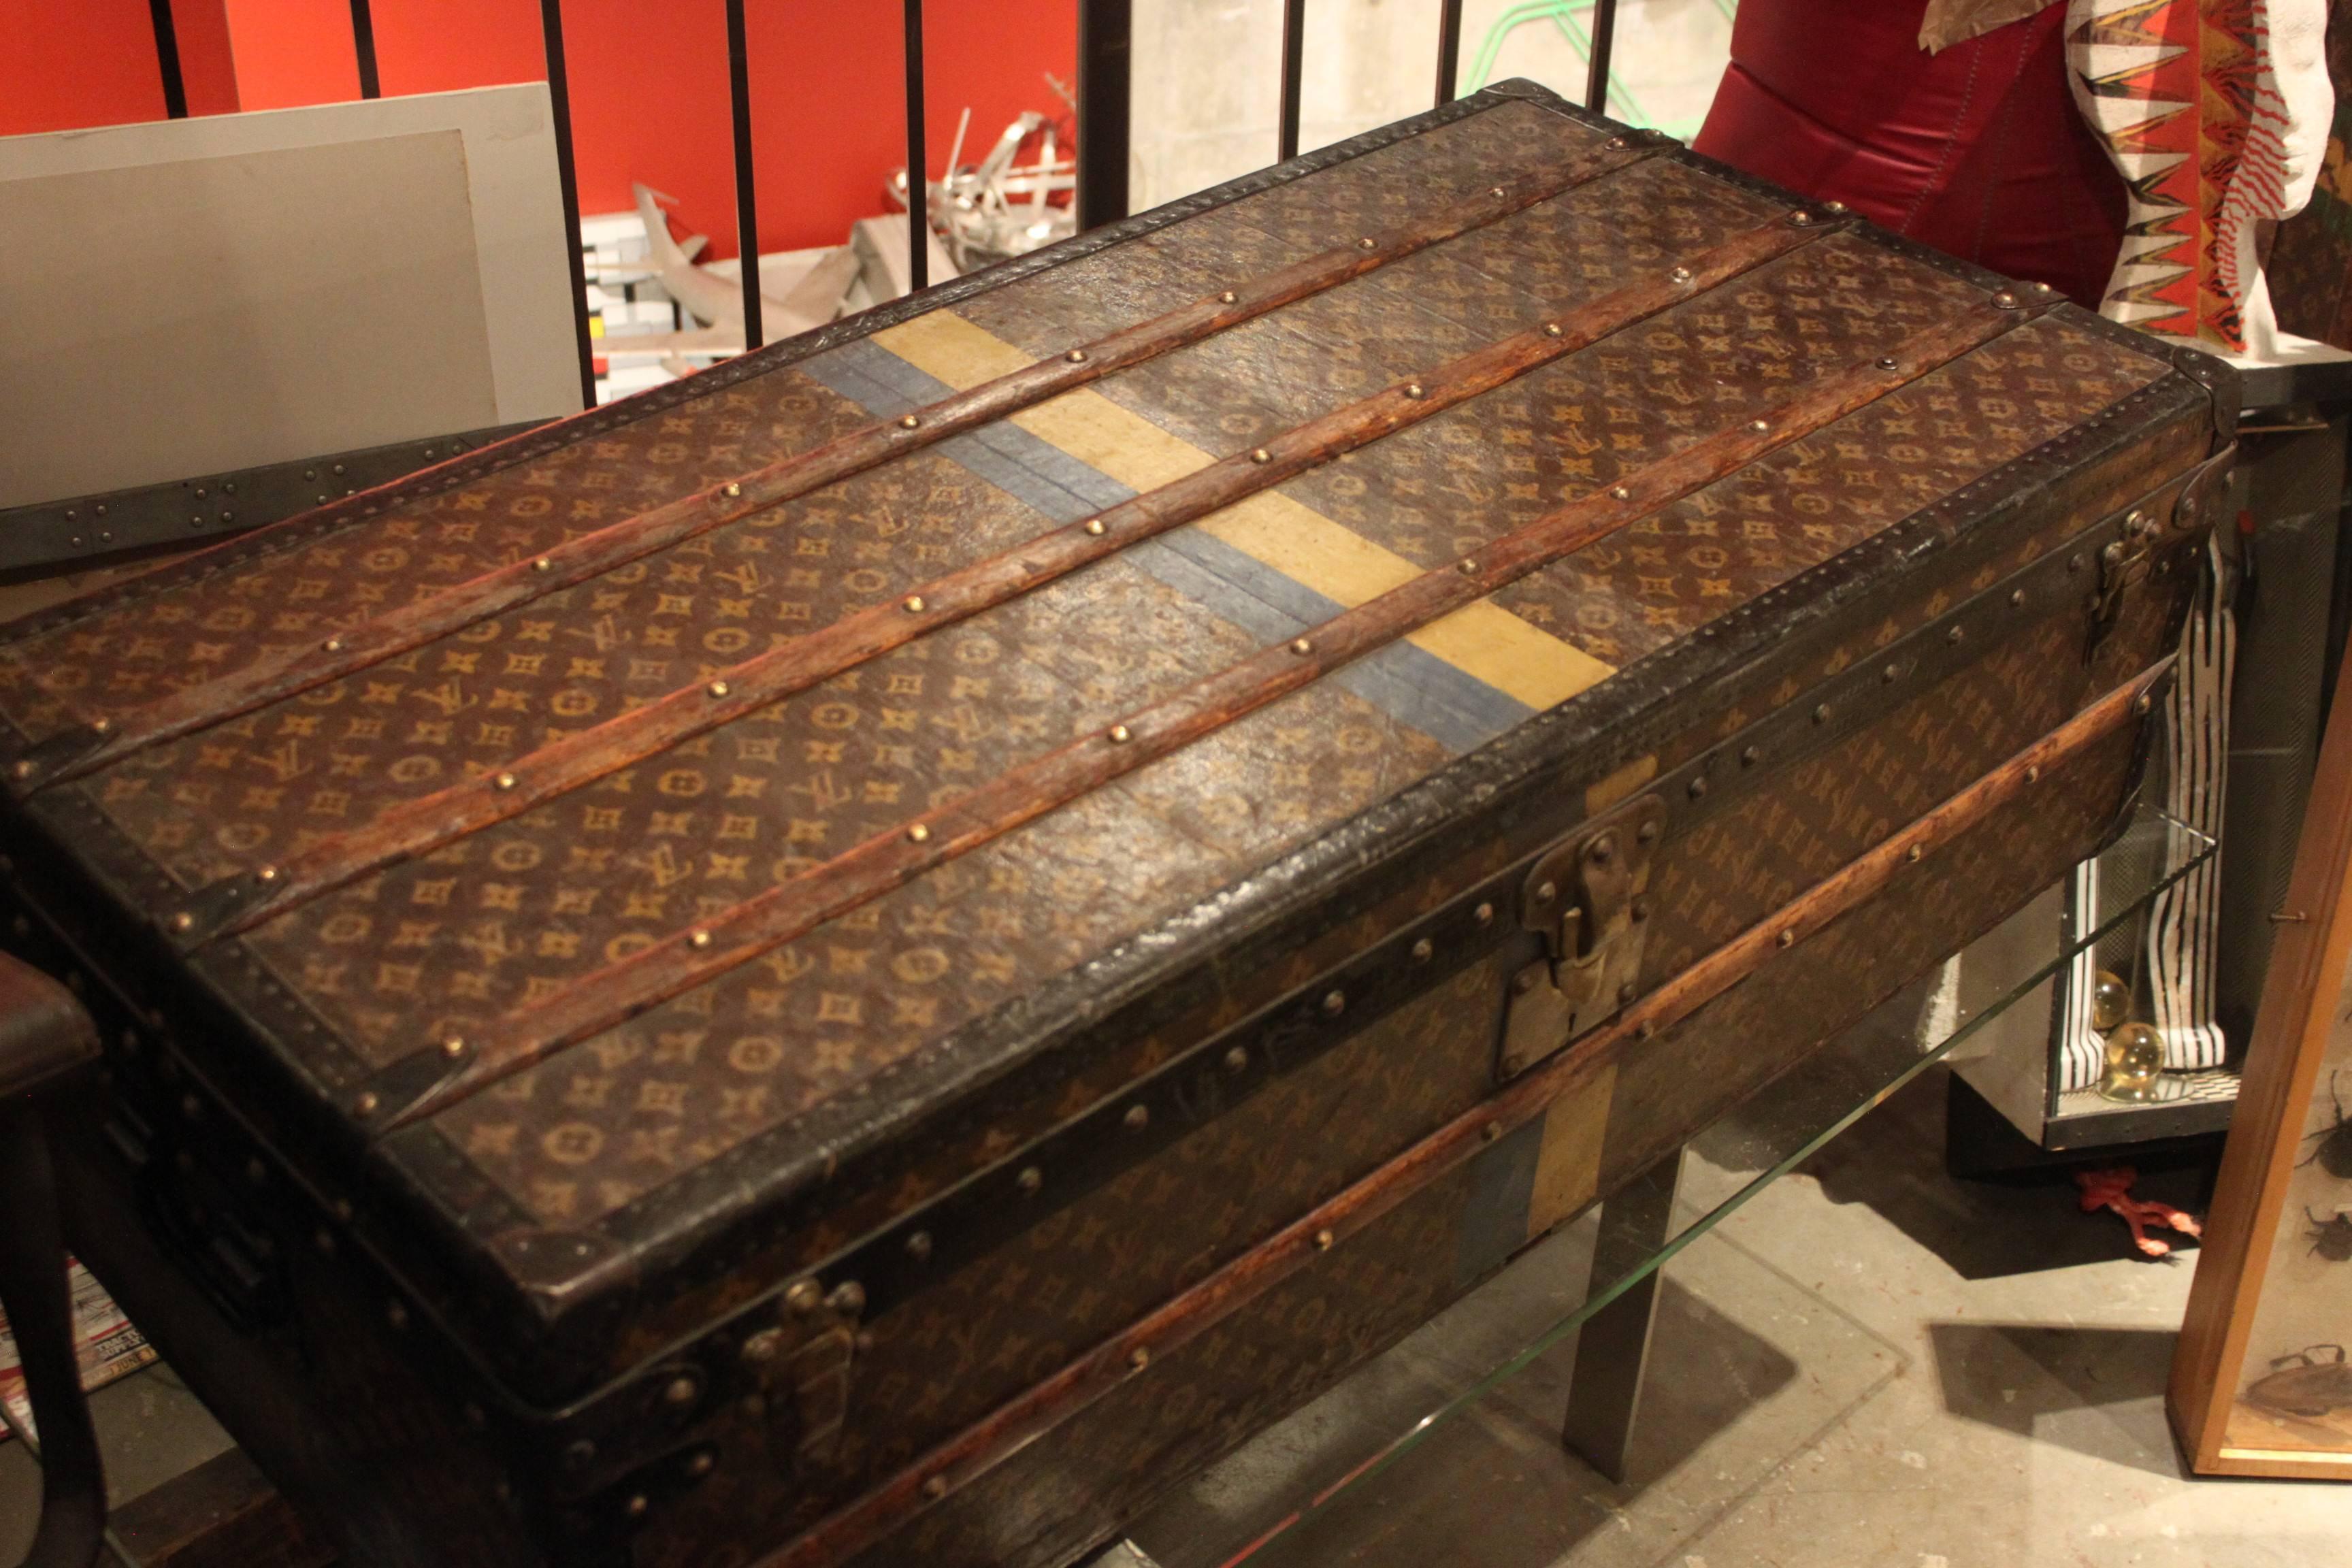 Fabulous 1930s Louis Vuitton steamer trunk with great original monogramming and striping. Perfect coffee table size.